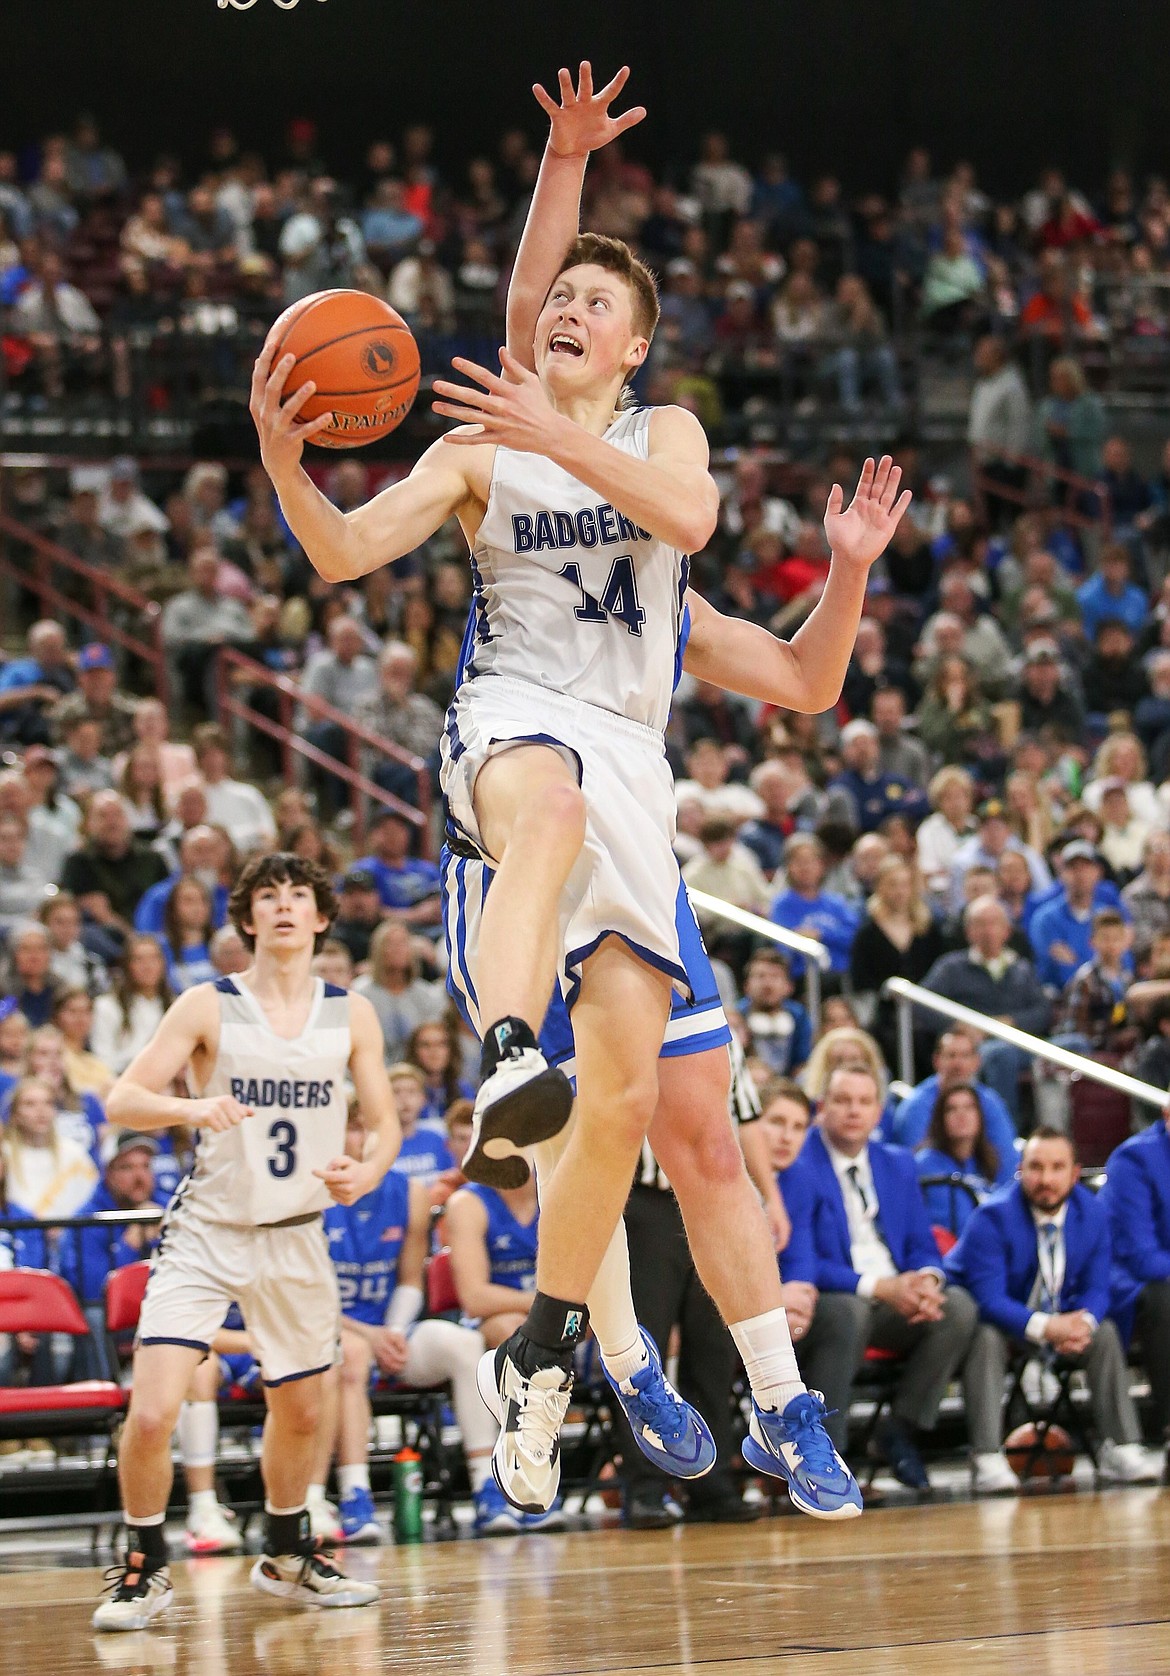 Thomas Bateman goes up for a layin against Sugar Salem at the 3A State Championship on March 4.